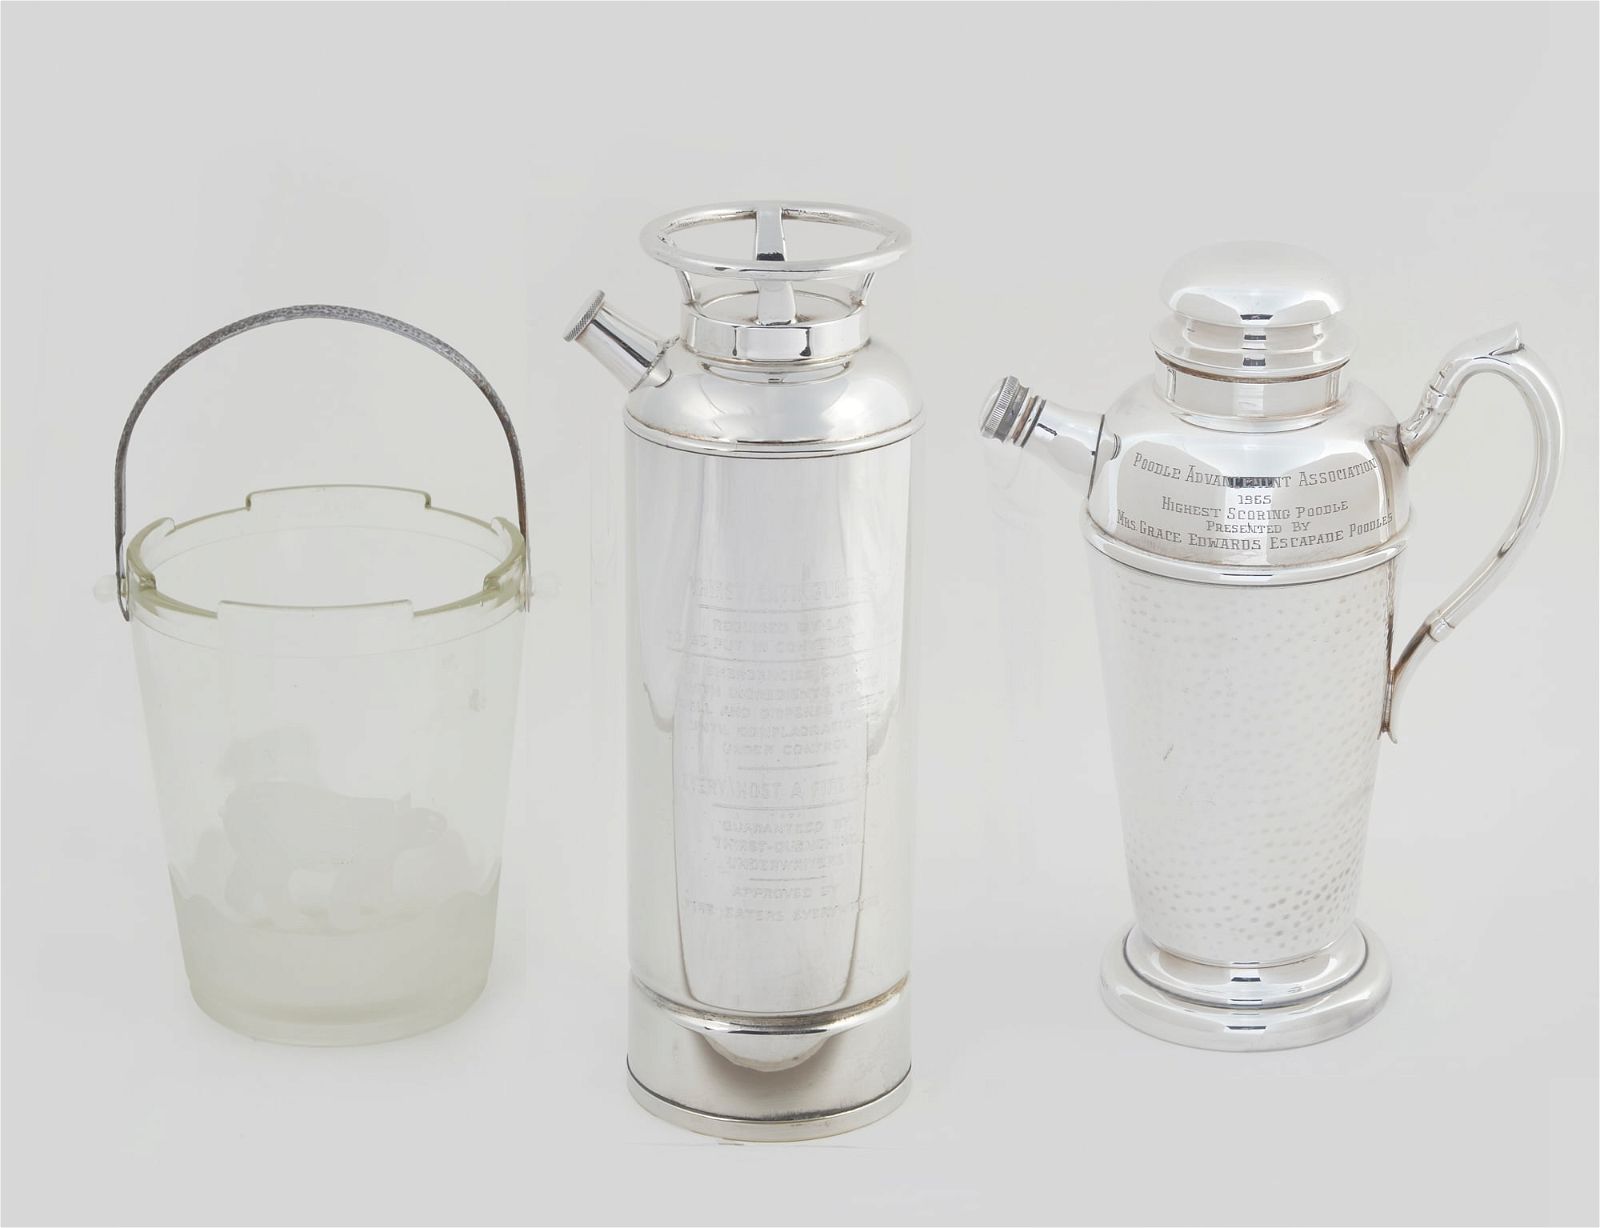 TWO SILVERPLATE COCKTAIL SHAKERS  2fb399d